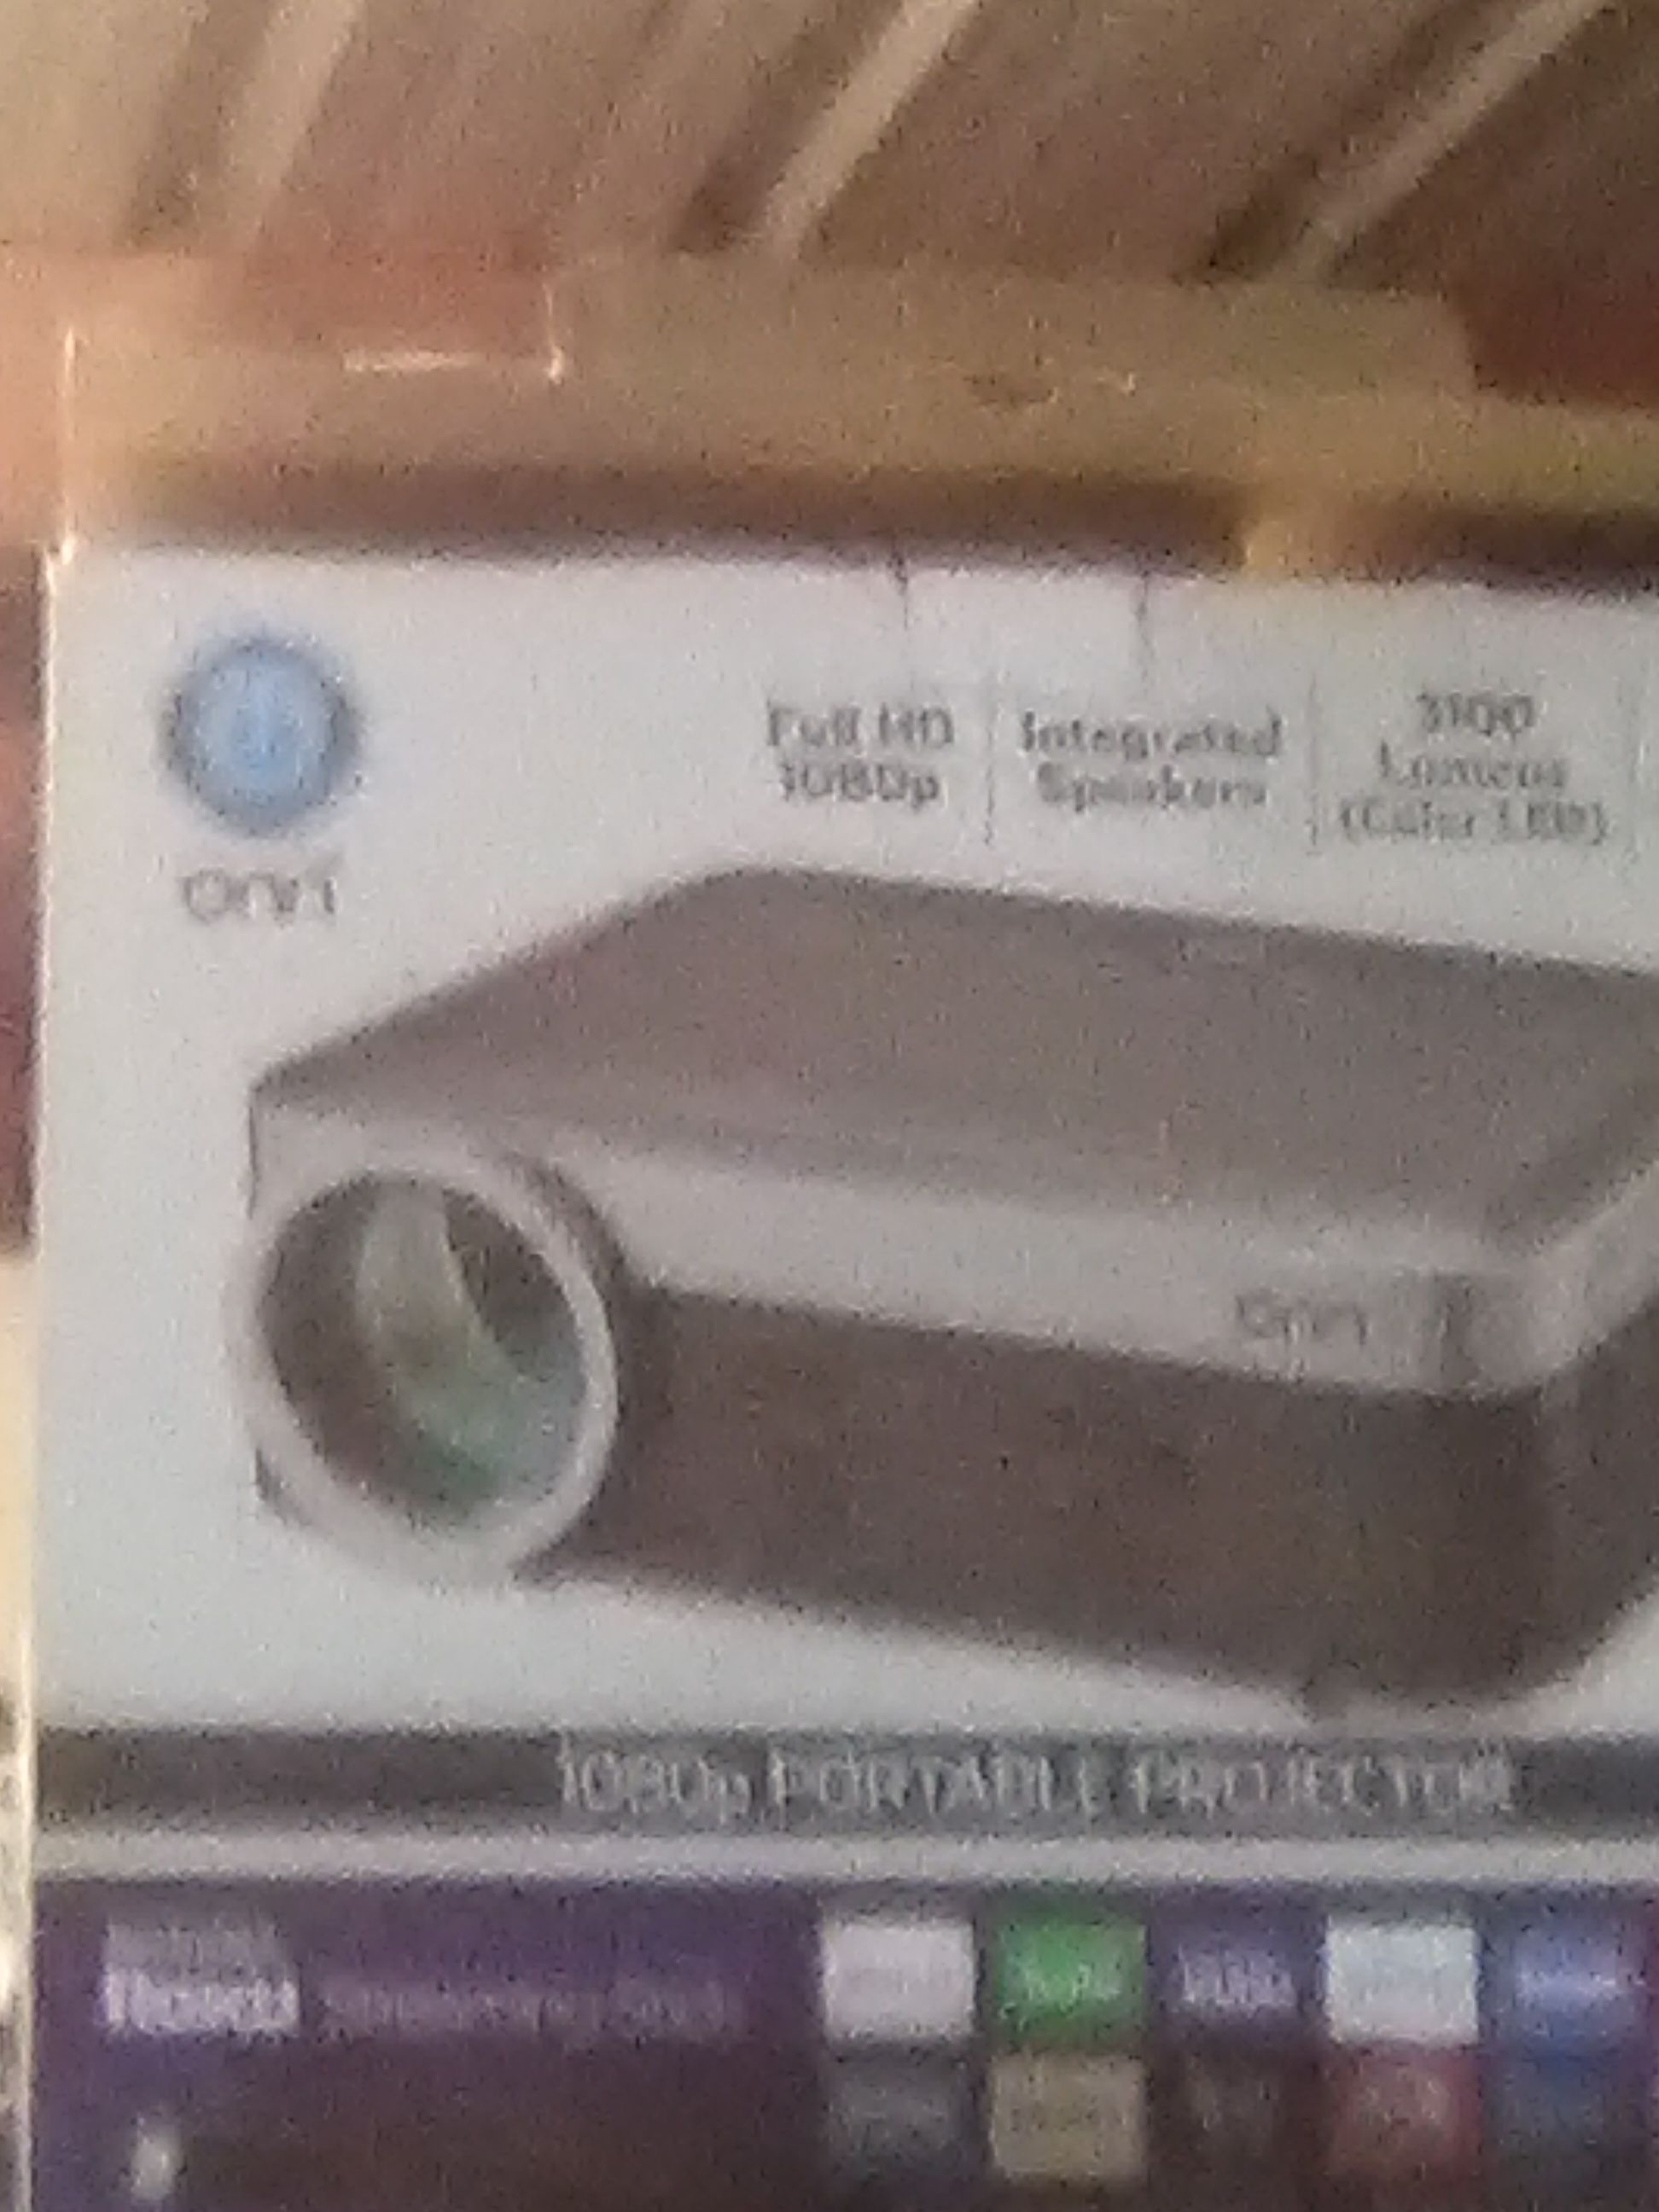 On projector with Roku. Brand new